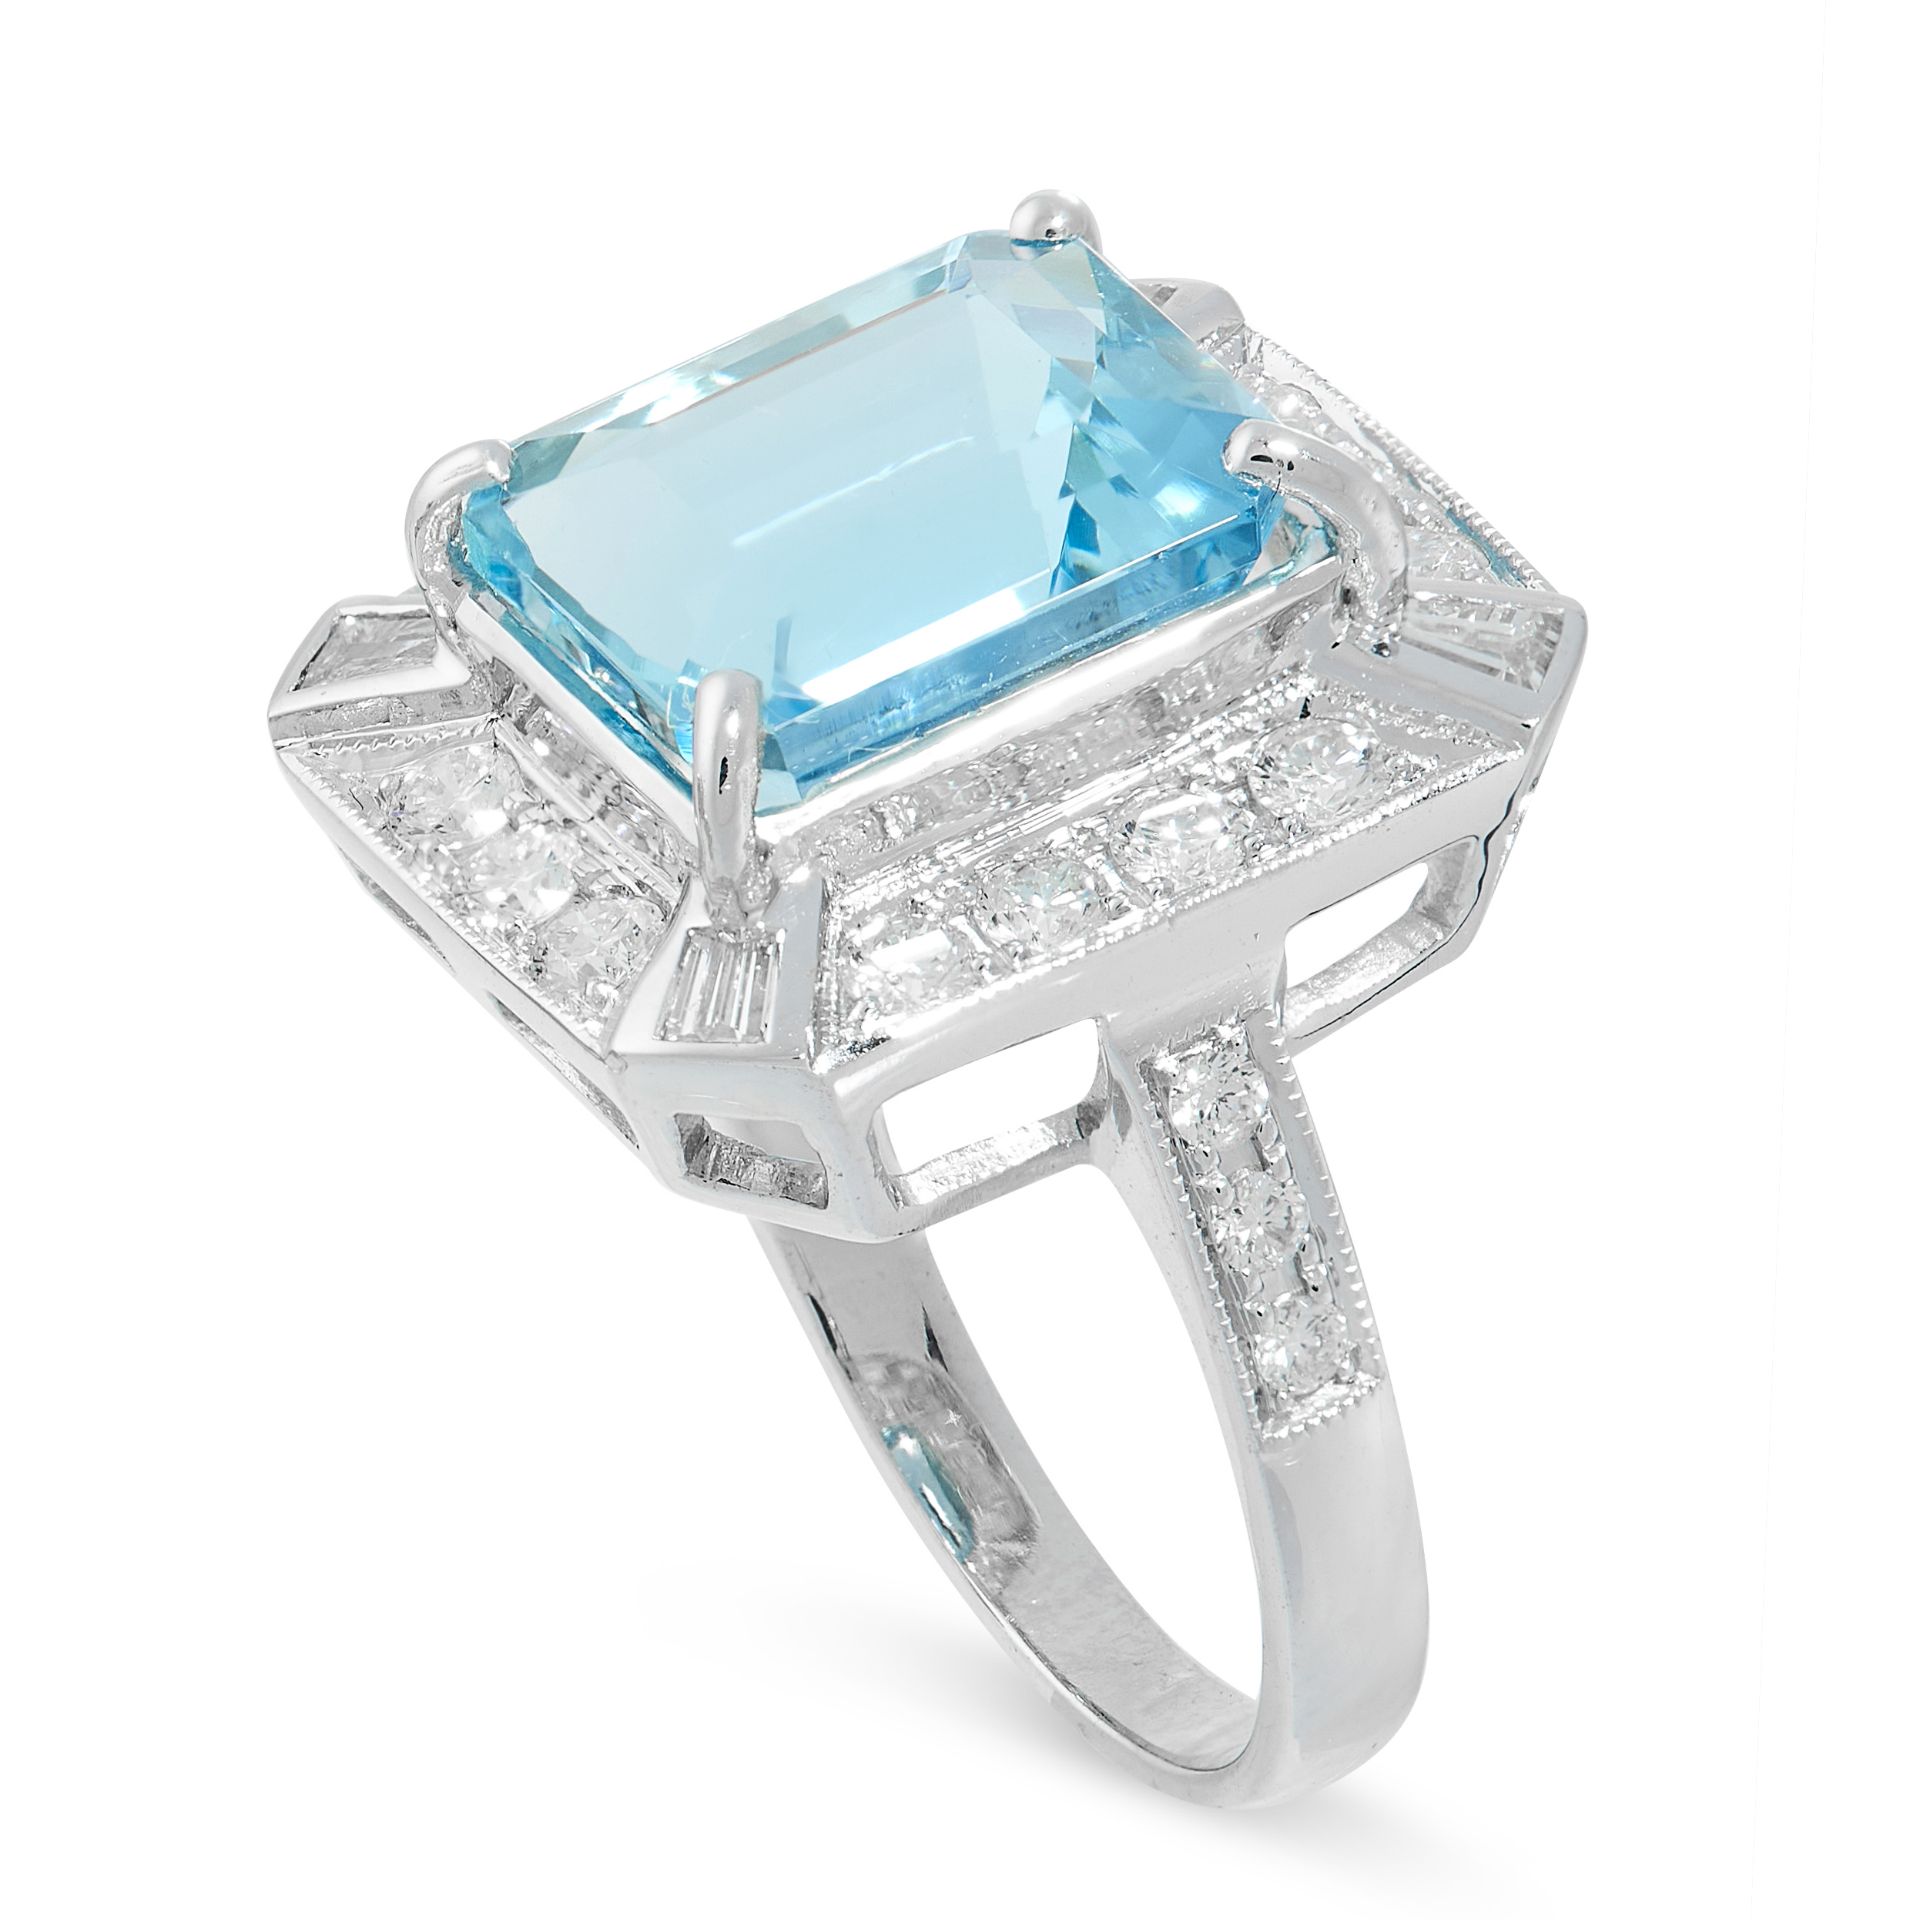 AN AQUAMARINE AND DIAMOND RING set with an emerald cut aquamarine of 5.54 carats in an octagonal - Image 2 of 2